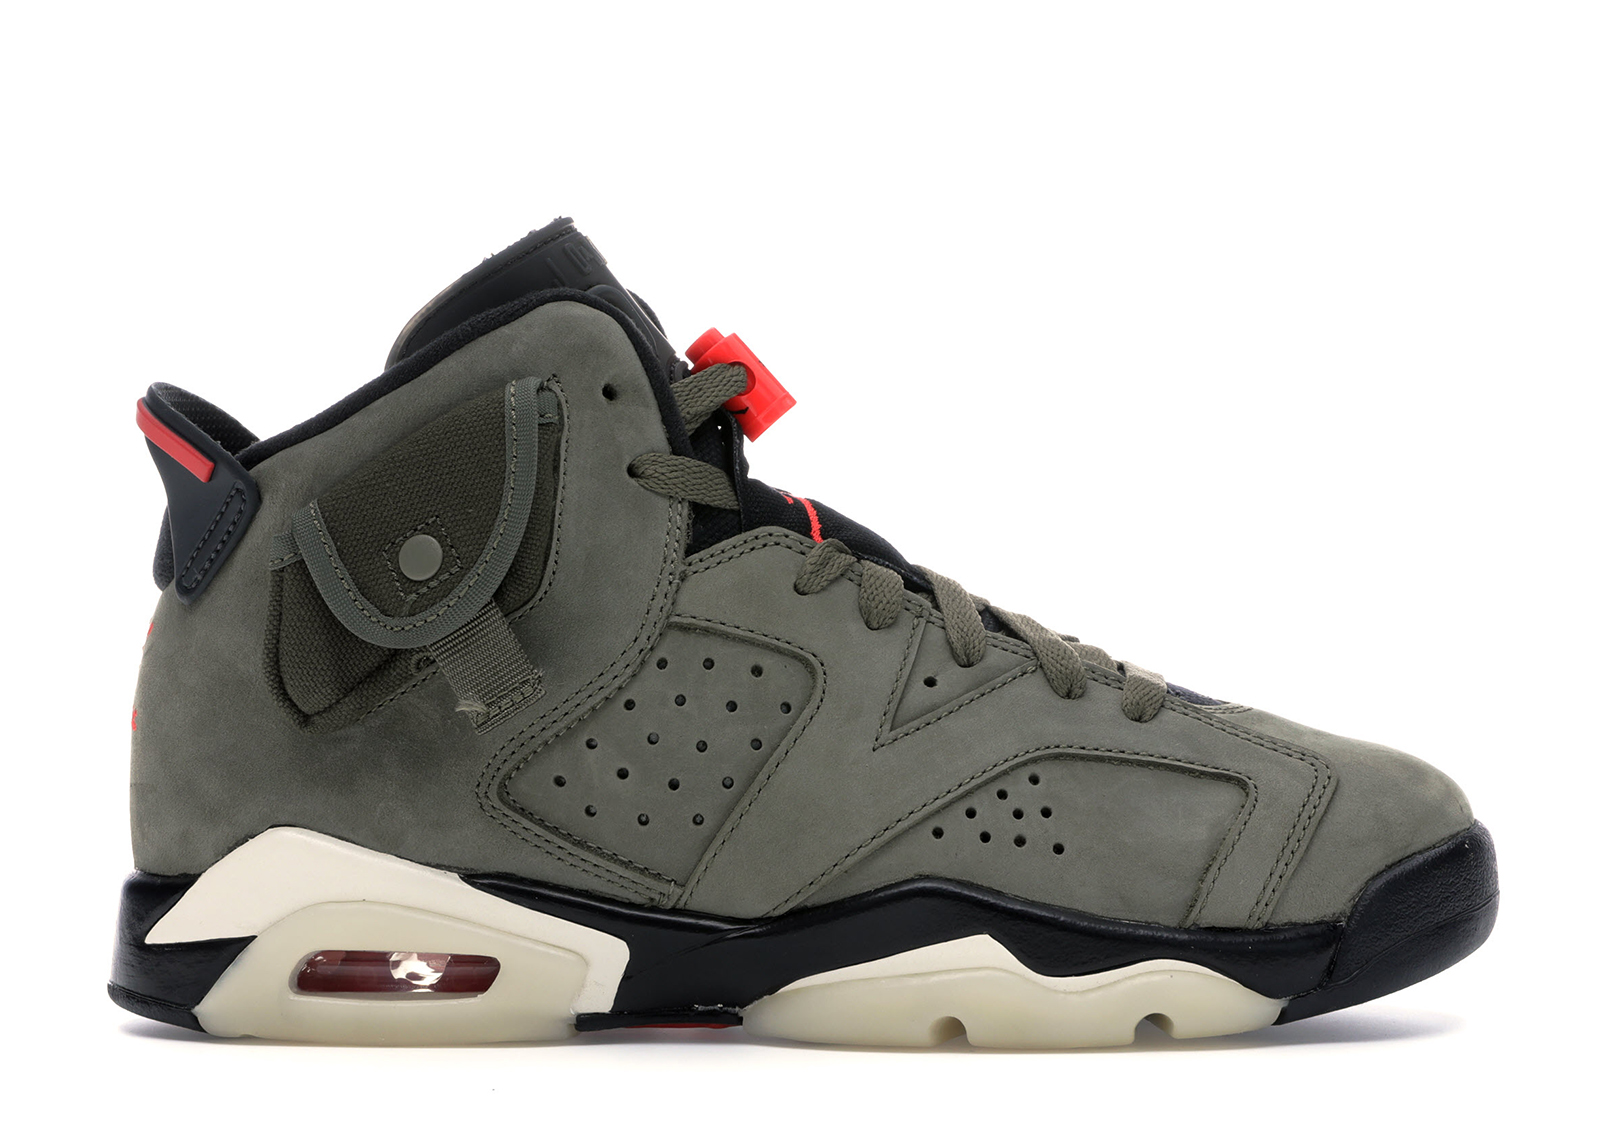 Jordan 6 - All Sizes & Colorways from $54 at StockX